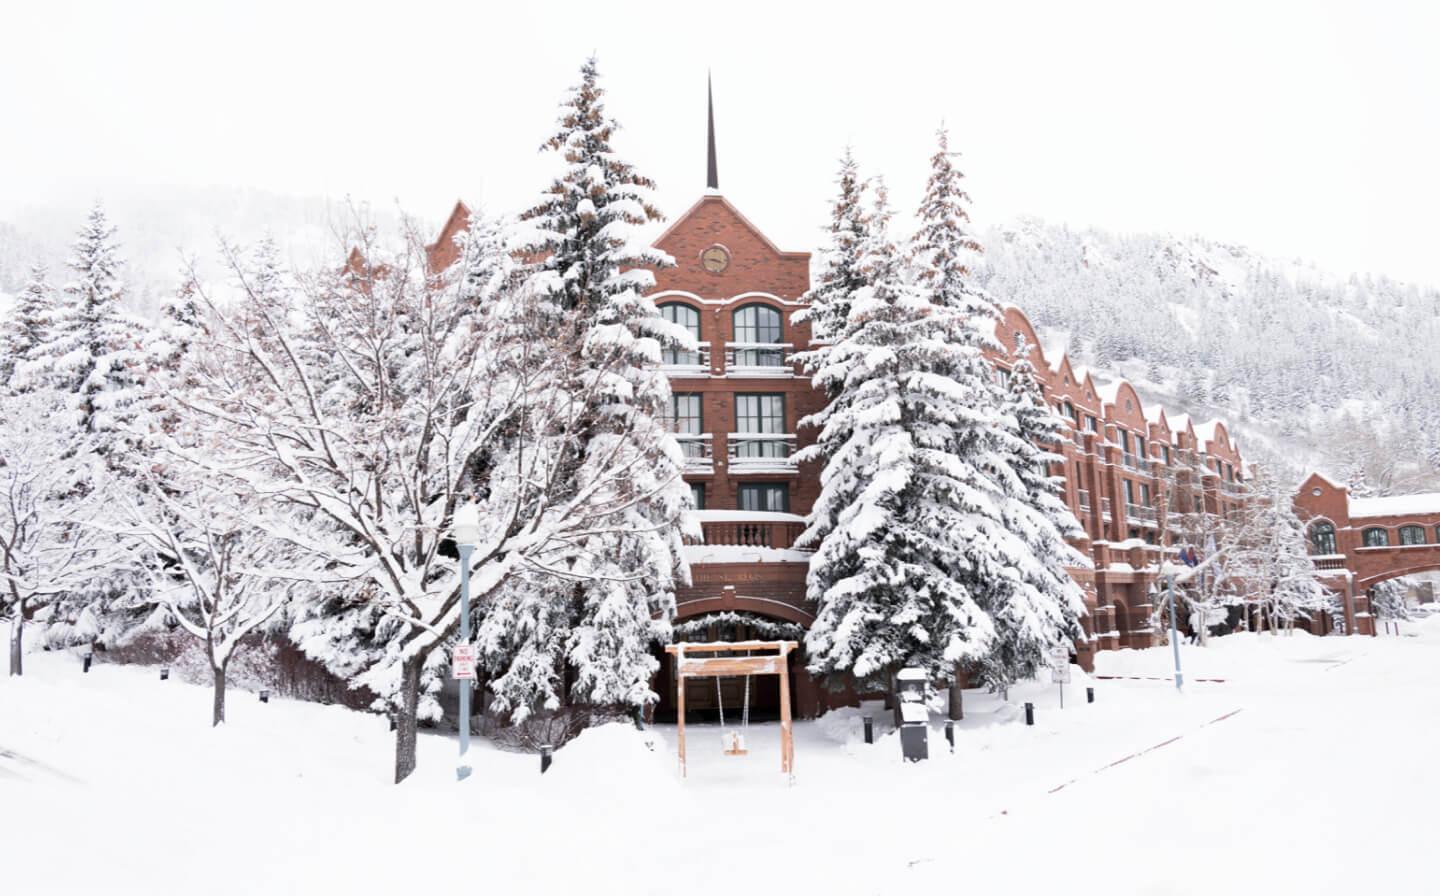 XO and The St. Regis Aspen Resort Announce Partnership Offering Elevated Travel Experiences